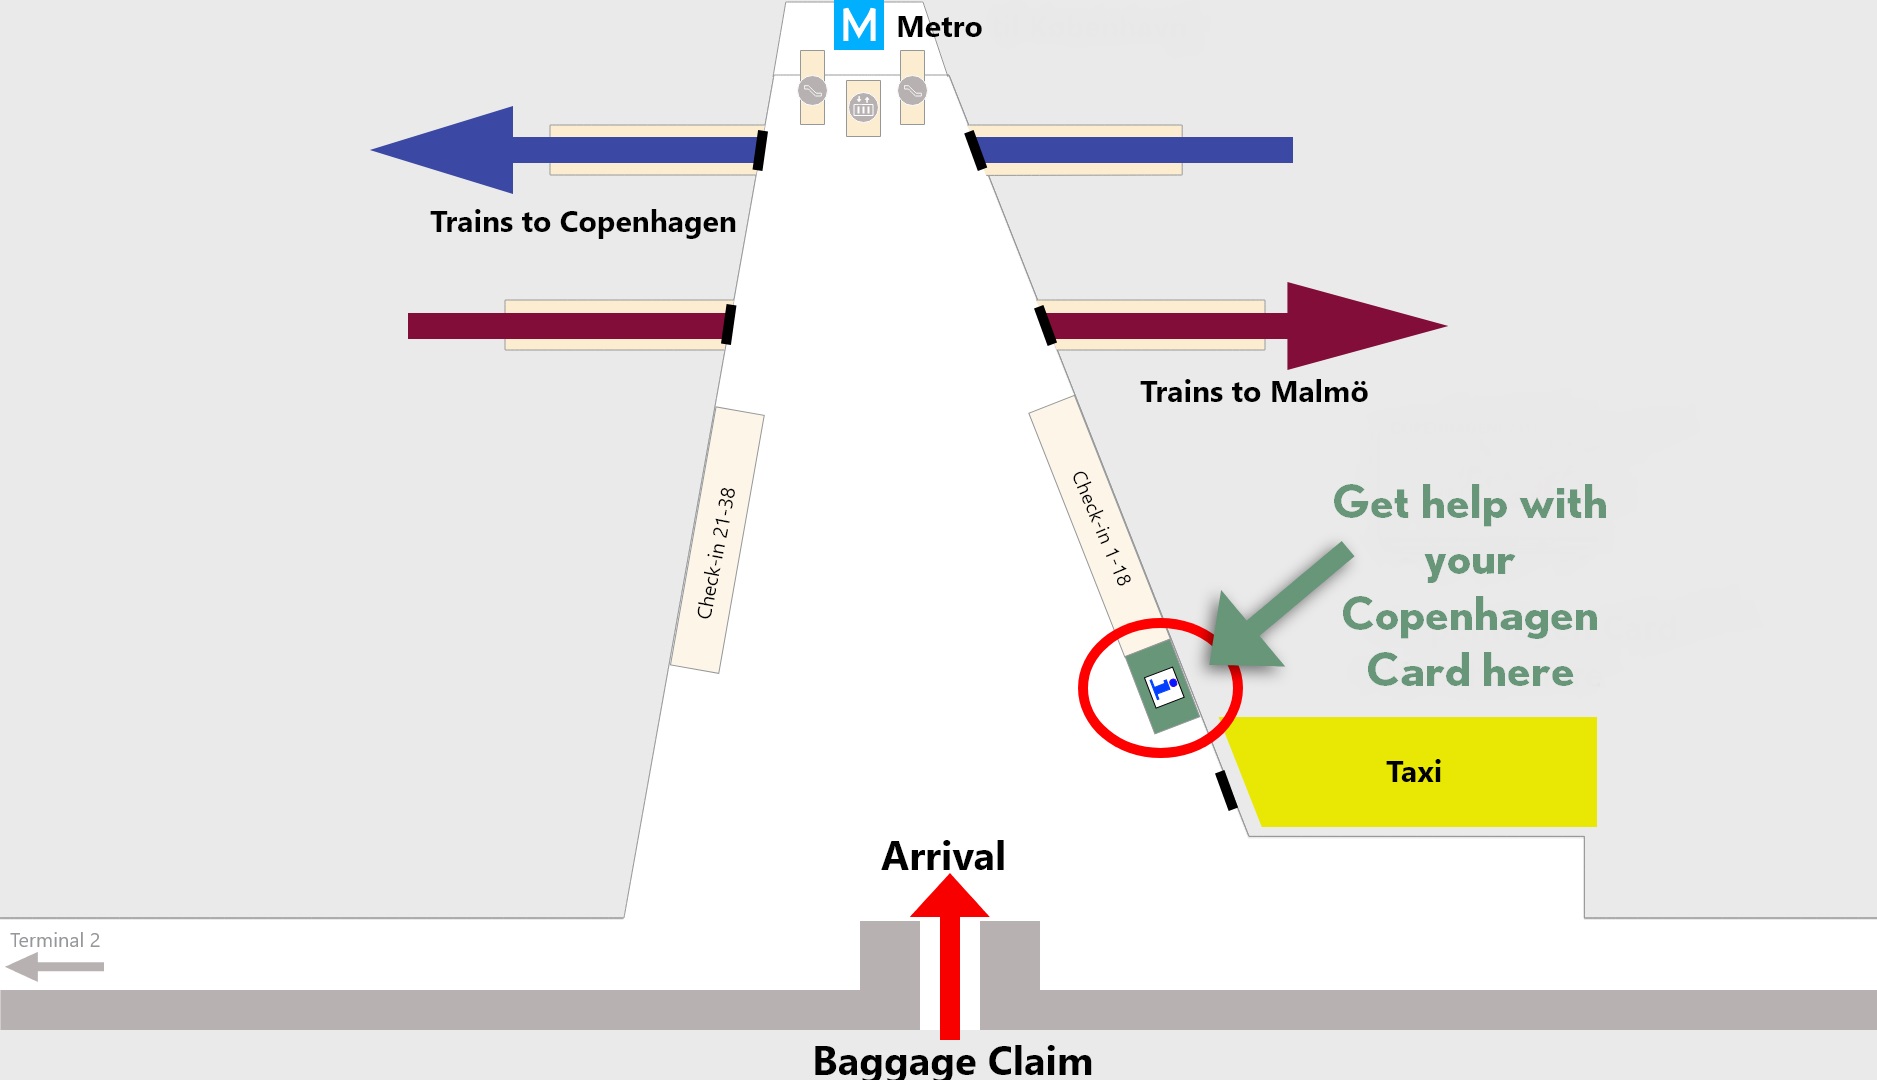 Map of where you can find help in Copenhagen Airport